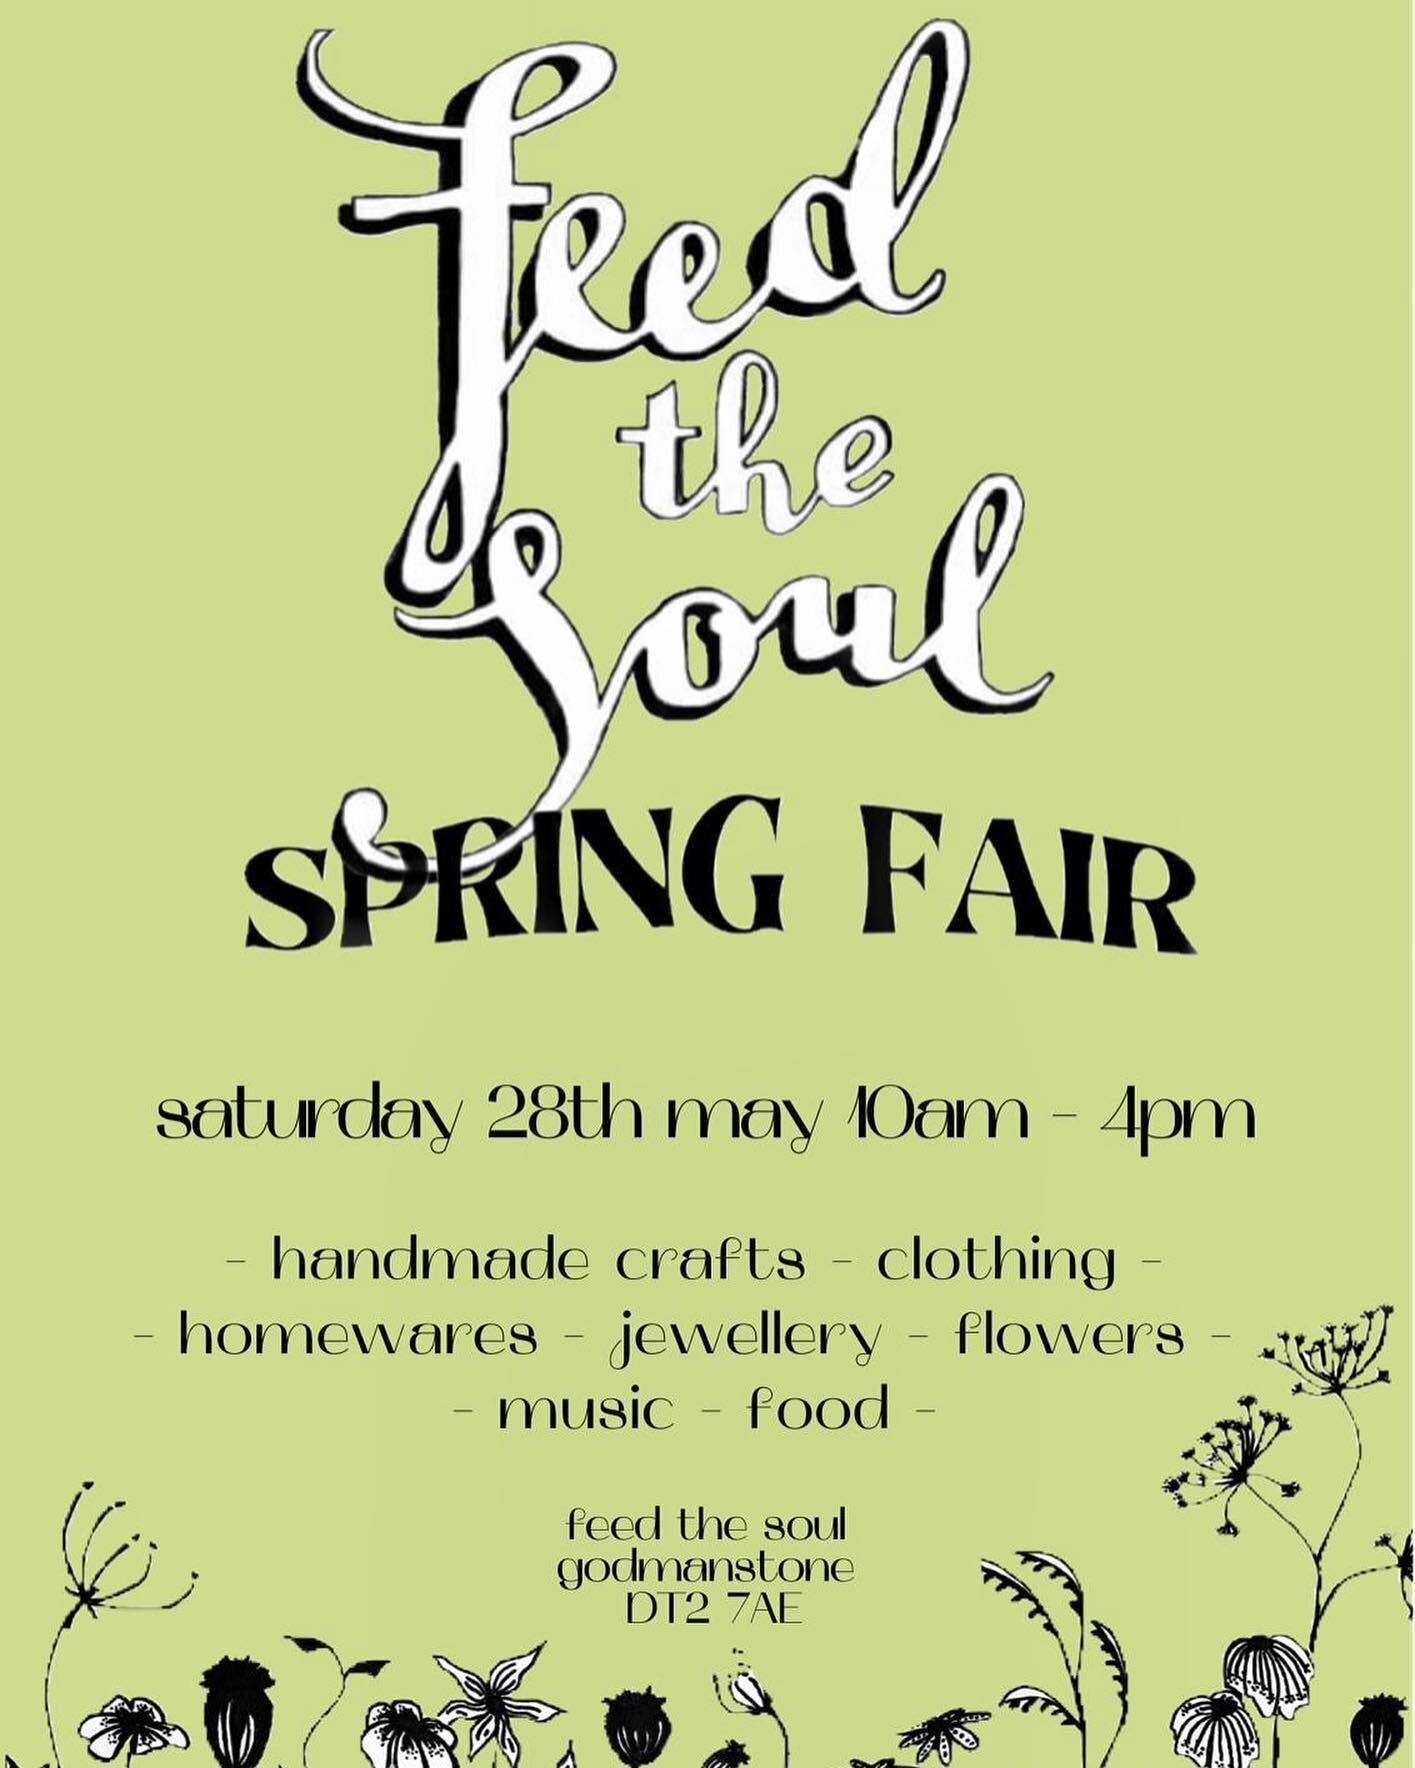 Spring Fair 28th may 10am - 4pm at Feed The soul! 

The farm courtyard will be full of  groovy traders

Our lovely Meg will be selling her vintage clothing @whatmegfound_ 

Heather will be selling her stunning organic flowers grown at the farm! @gree